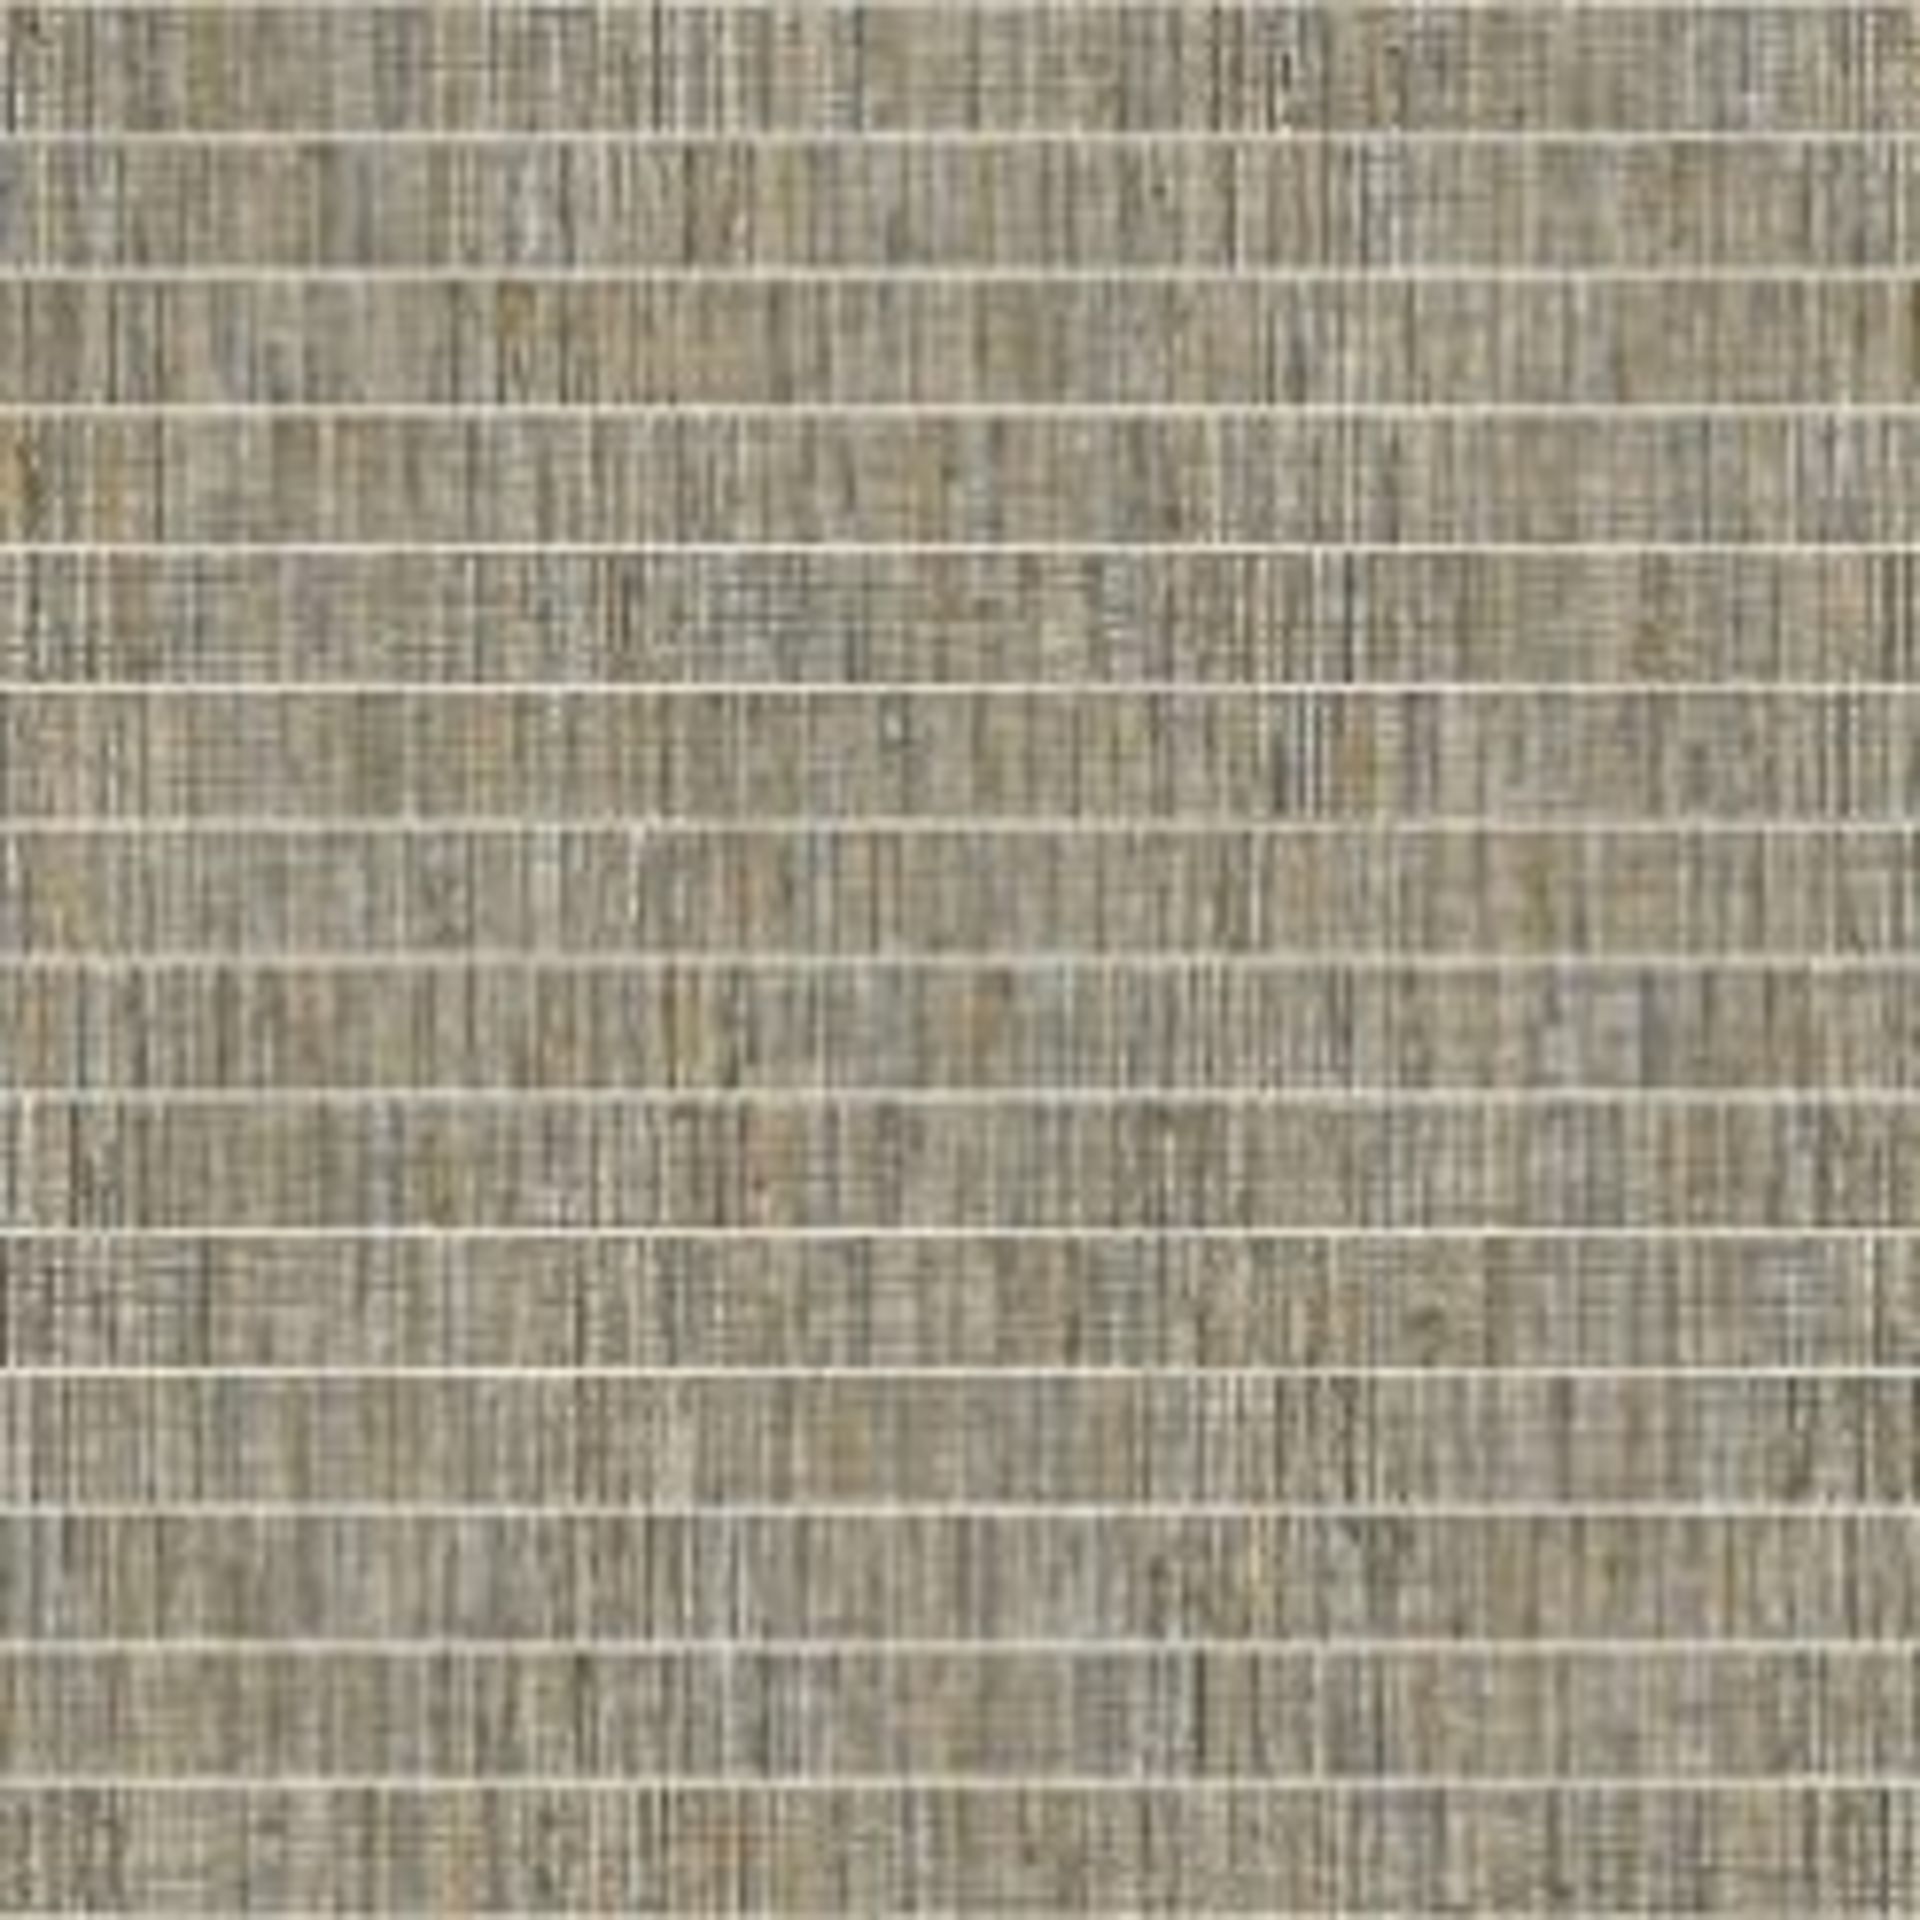 142 Rolls of More Textures Wallpaper (Bays 1565 – 1597) (Library Images – Some Colours May Not Be - Image 7 of 49